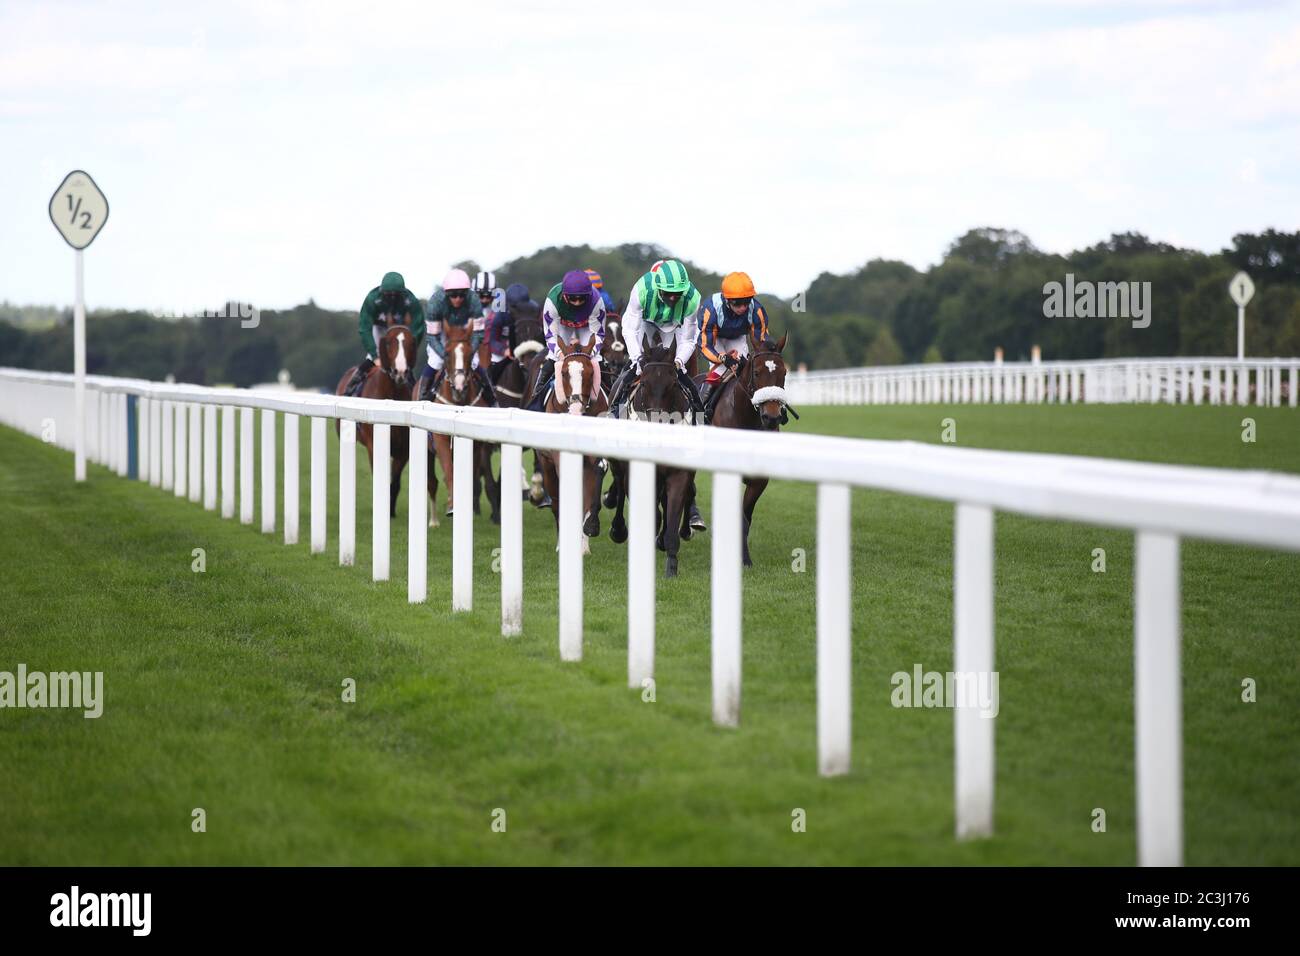 Adrrastos ridden by James Doyle leads the first lap of the Queen Alexandra Stakes during day five of Royal Ascot at Ascot Racecourse. Stock Photo